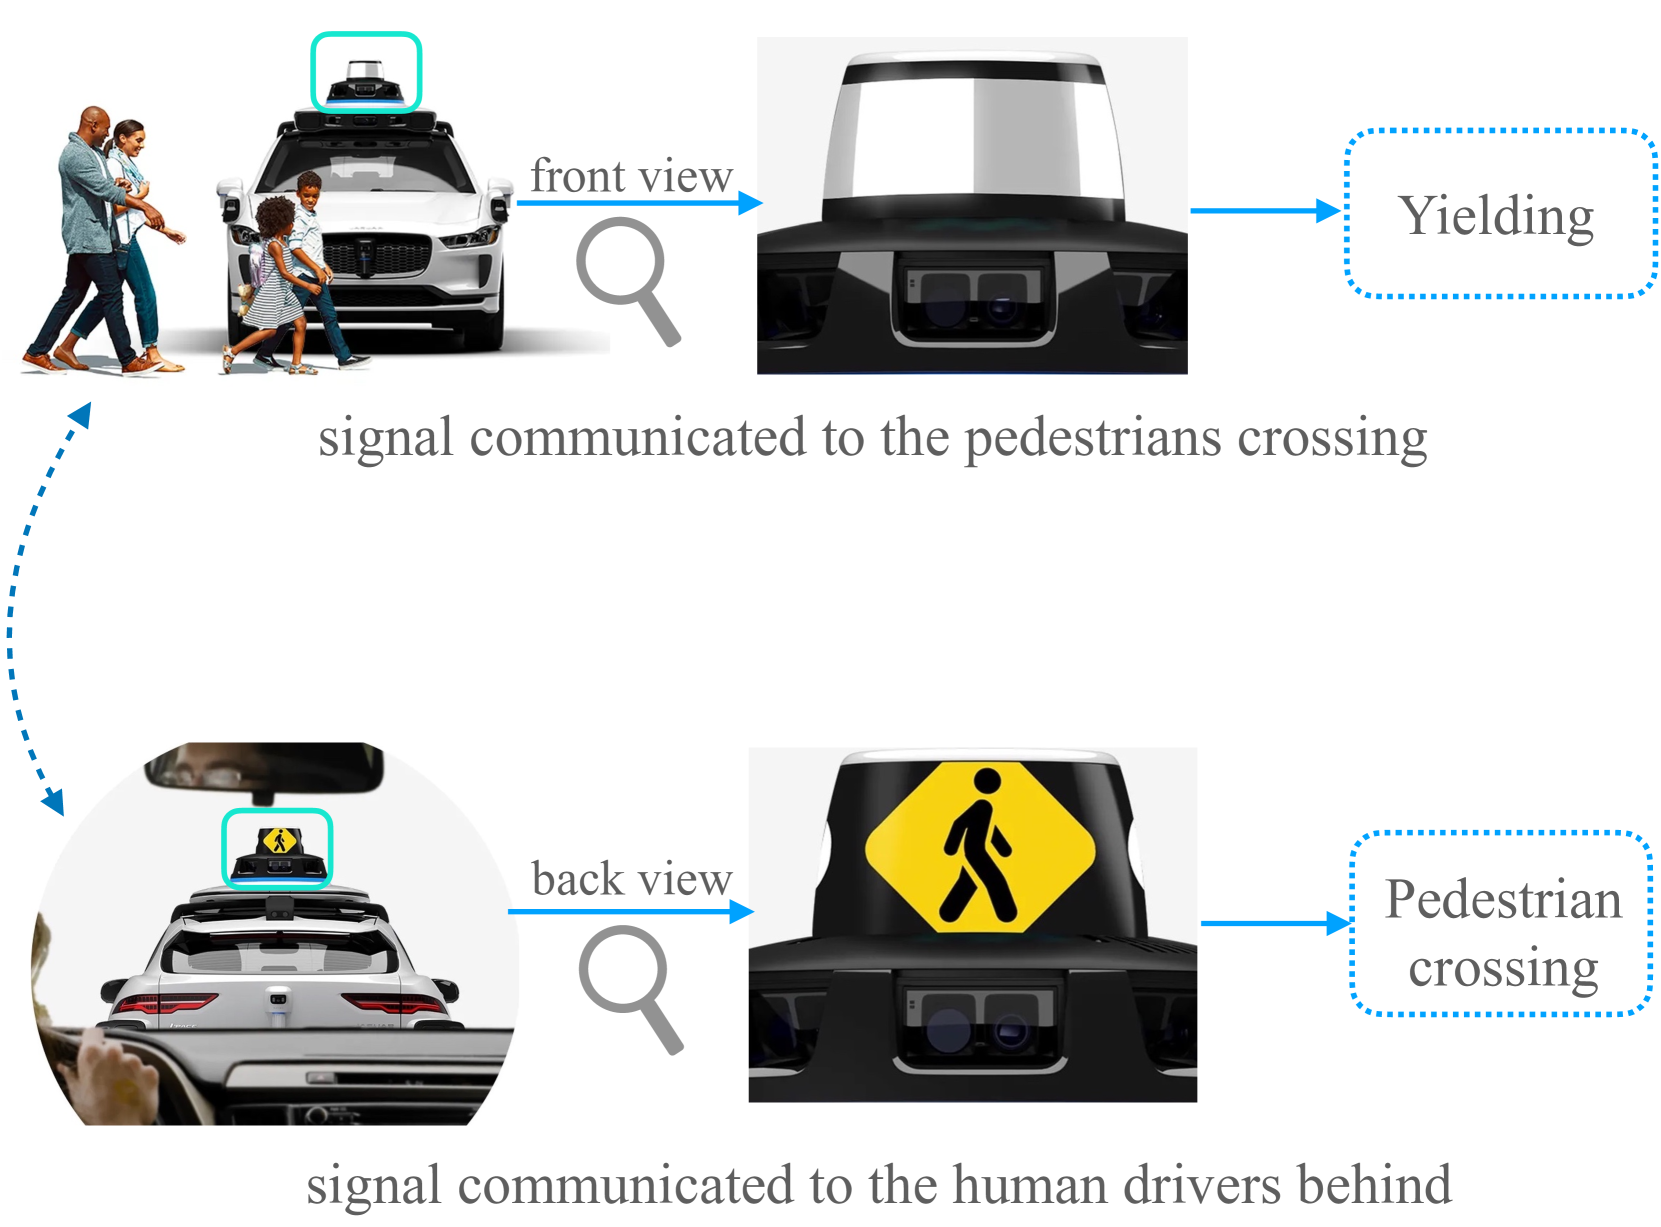 Incorporating Explanations into Human-Machine Interfaces for Trust and Situation Awareness in Autonomous Vehicles